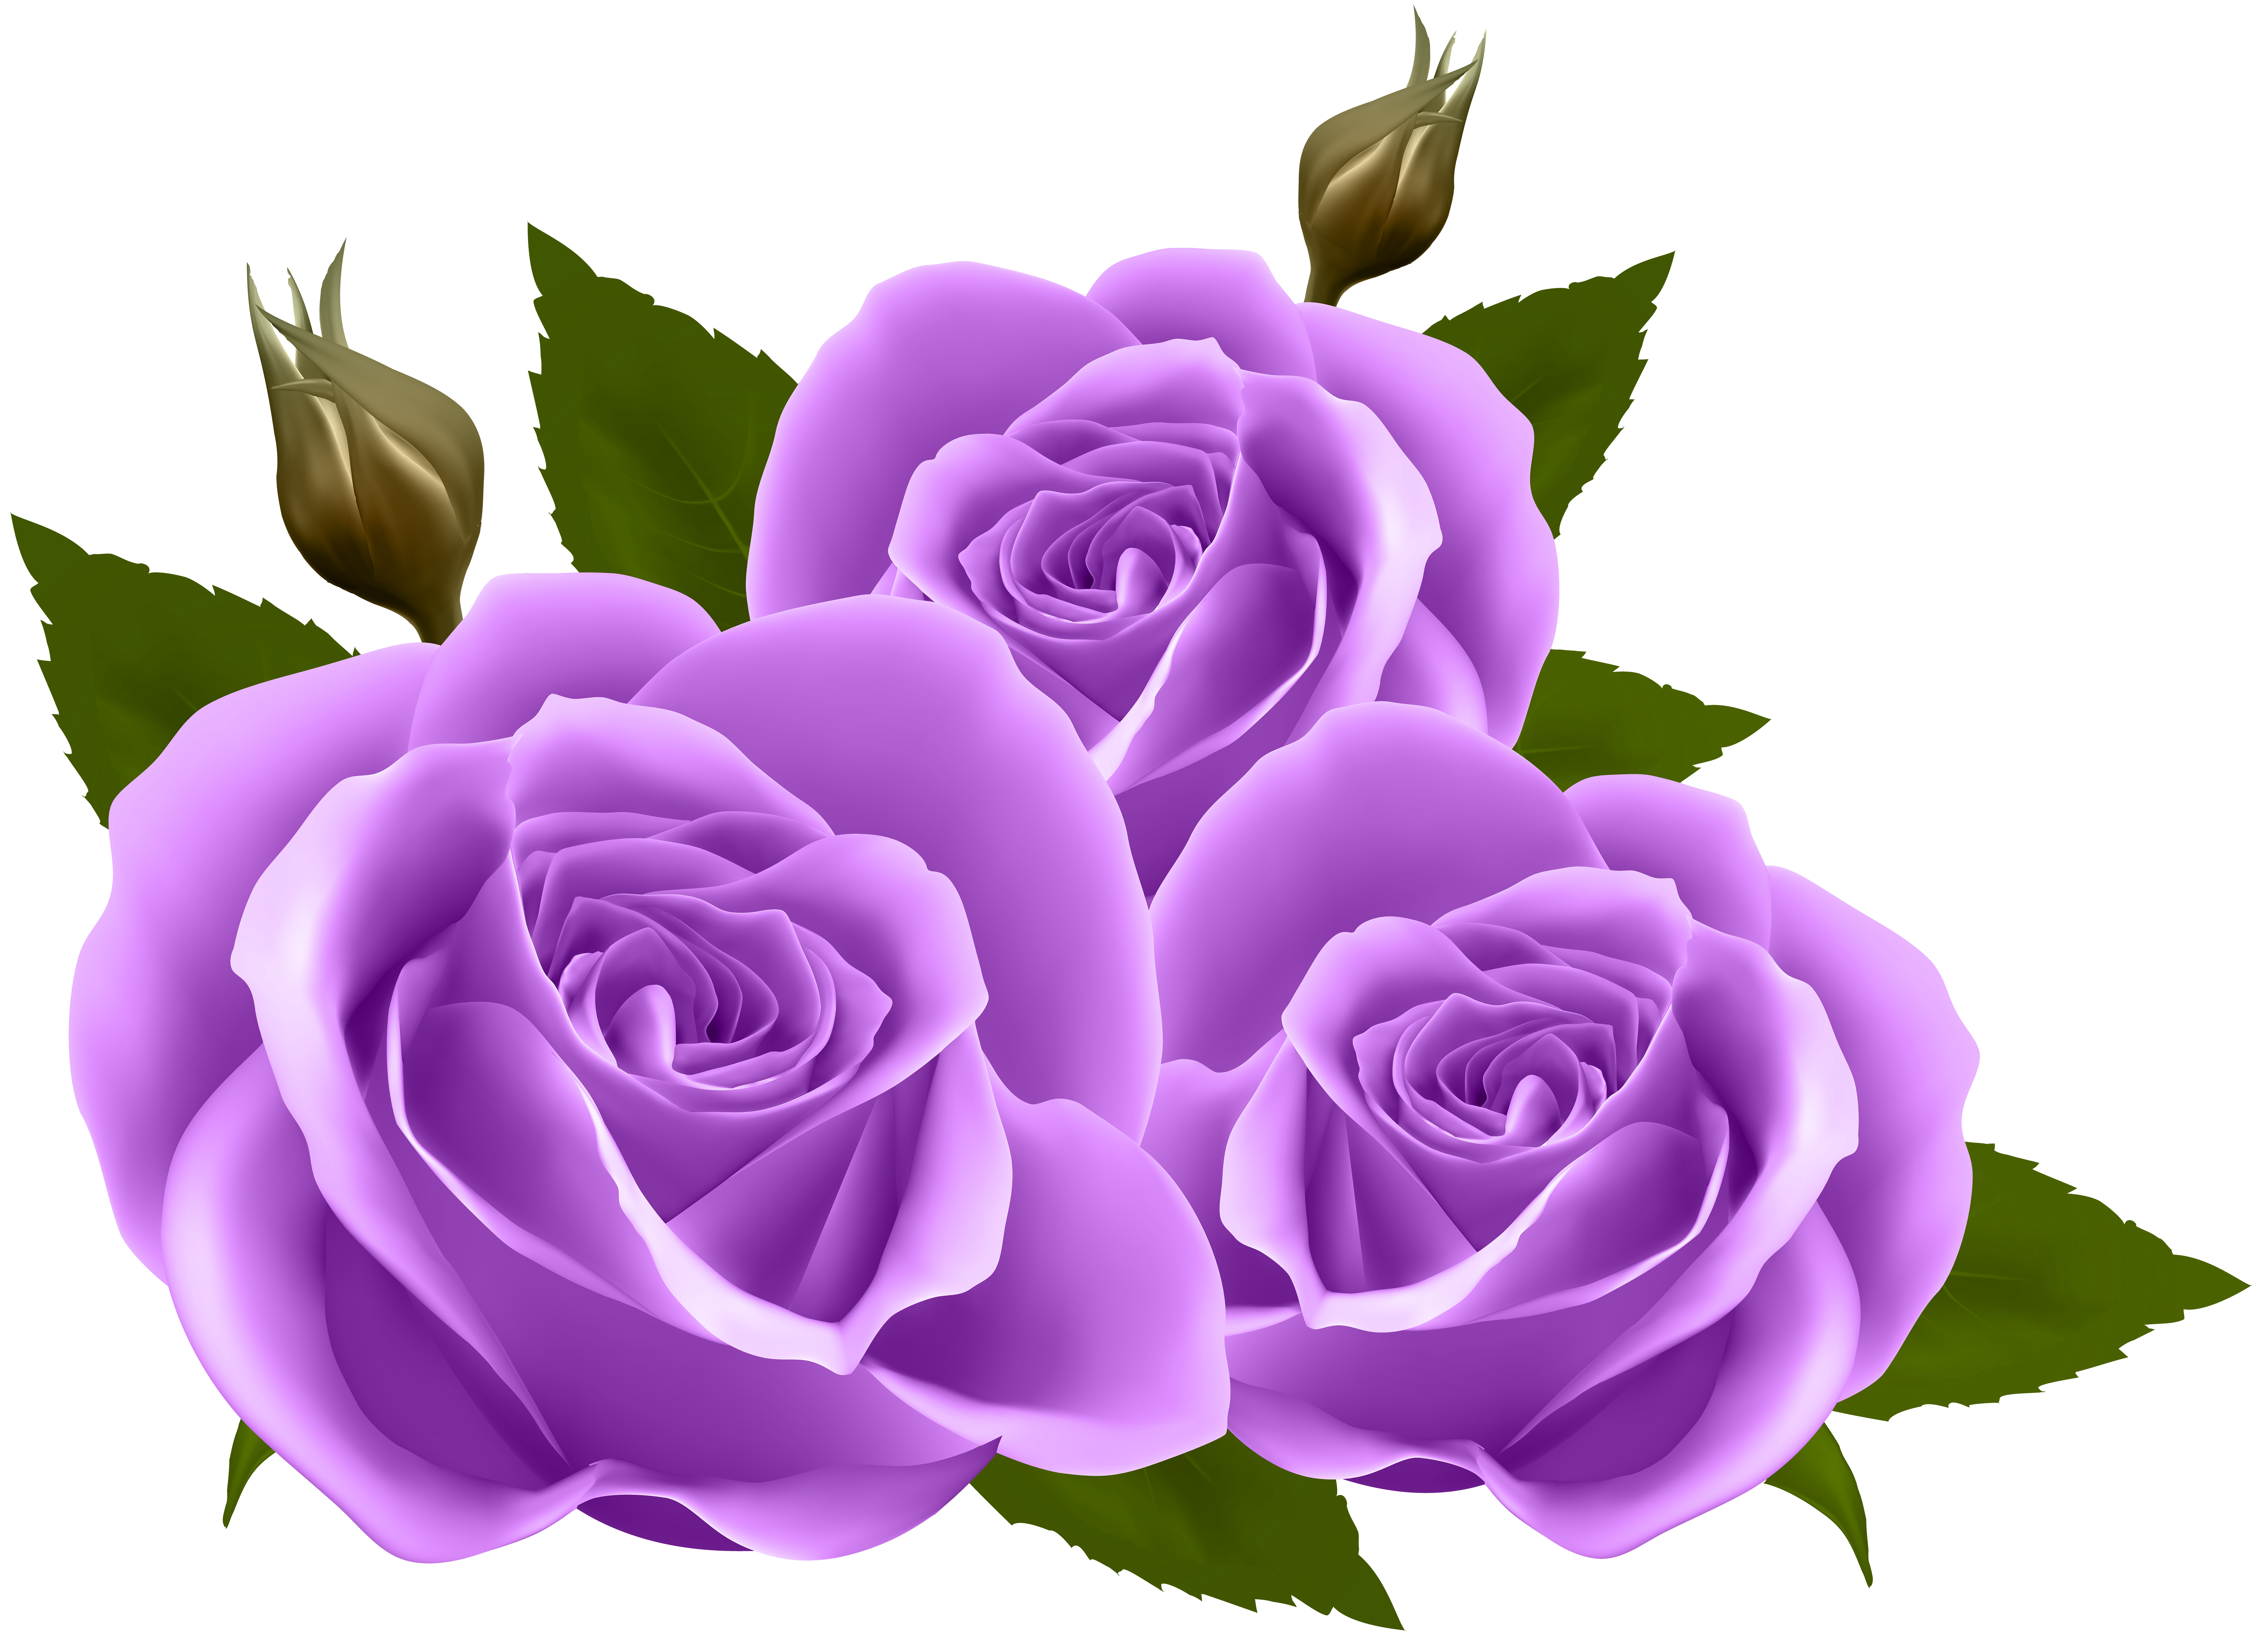 Purple Roses PNG Clip Art Image | Gallery Yopriceville - High ...